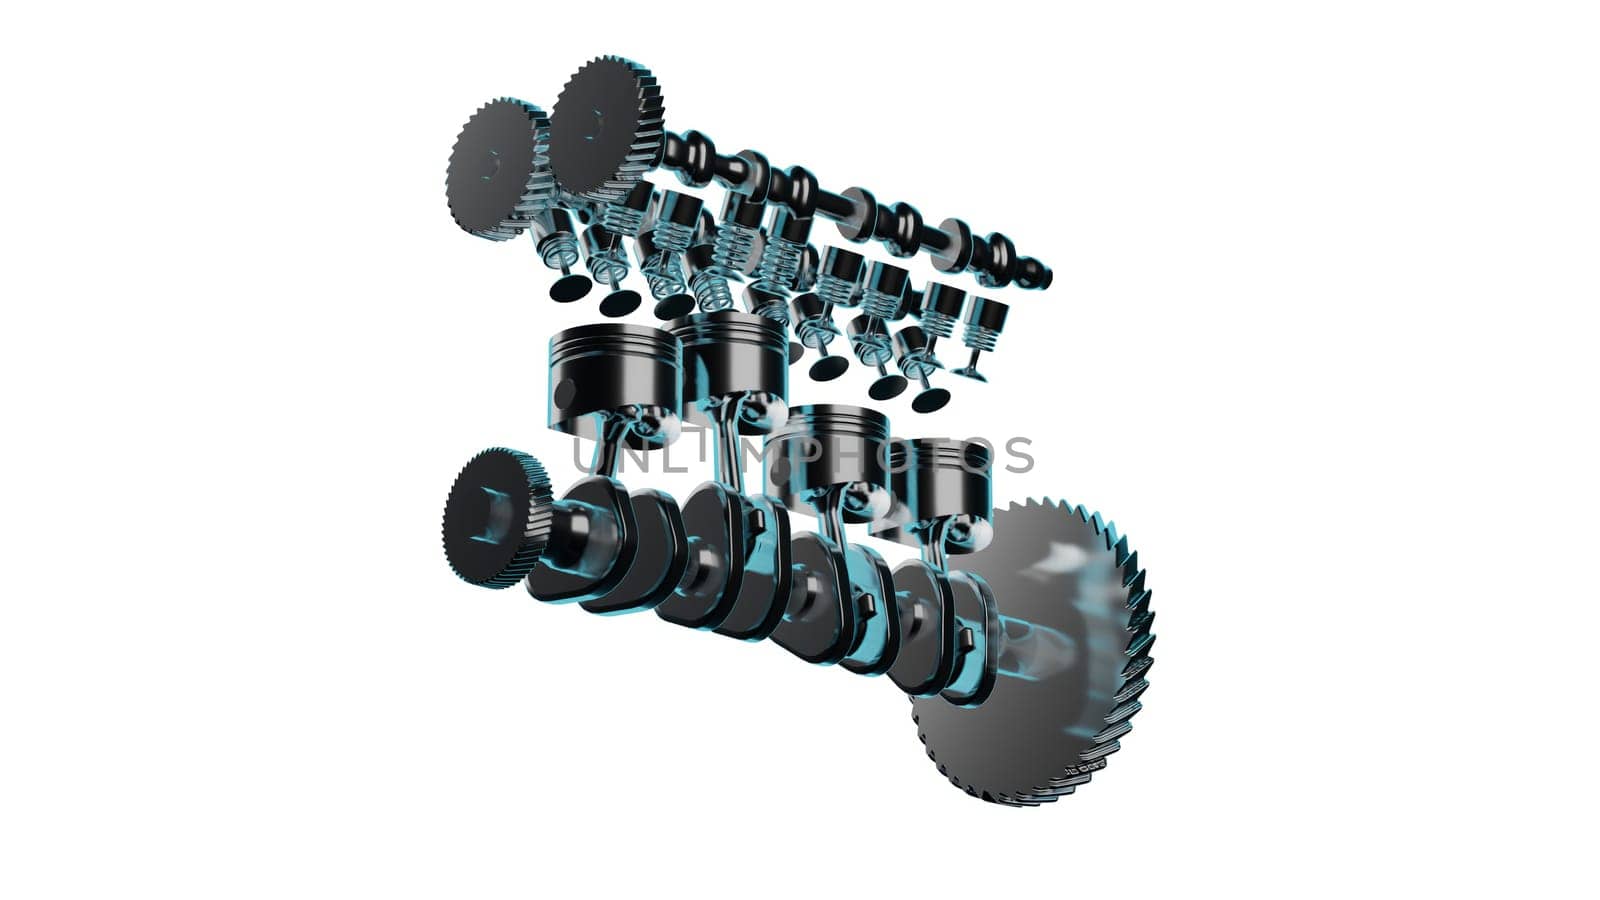 Close up detailed fully textured 3D render over white background of diesel motor with pistons, crankshaft, valves and other mechanical components offering high performance